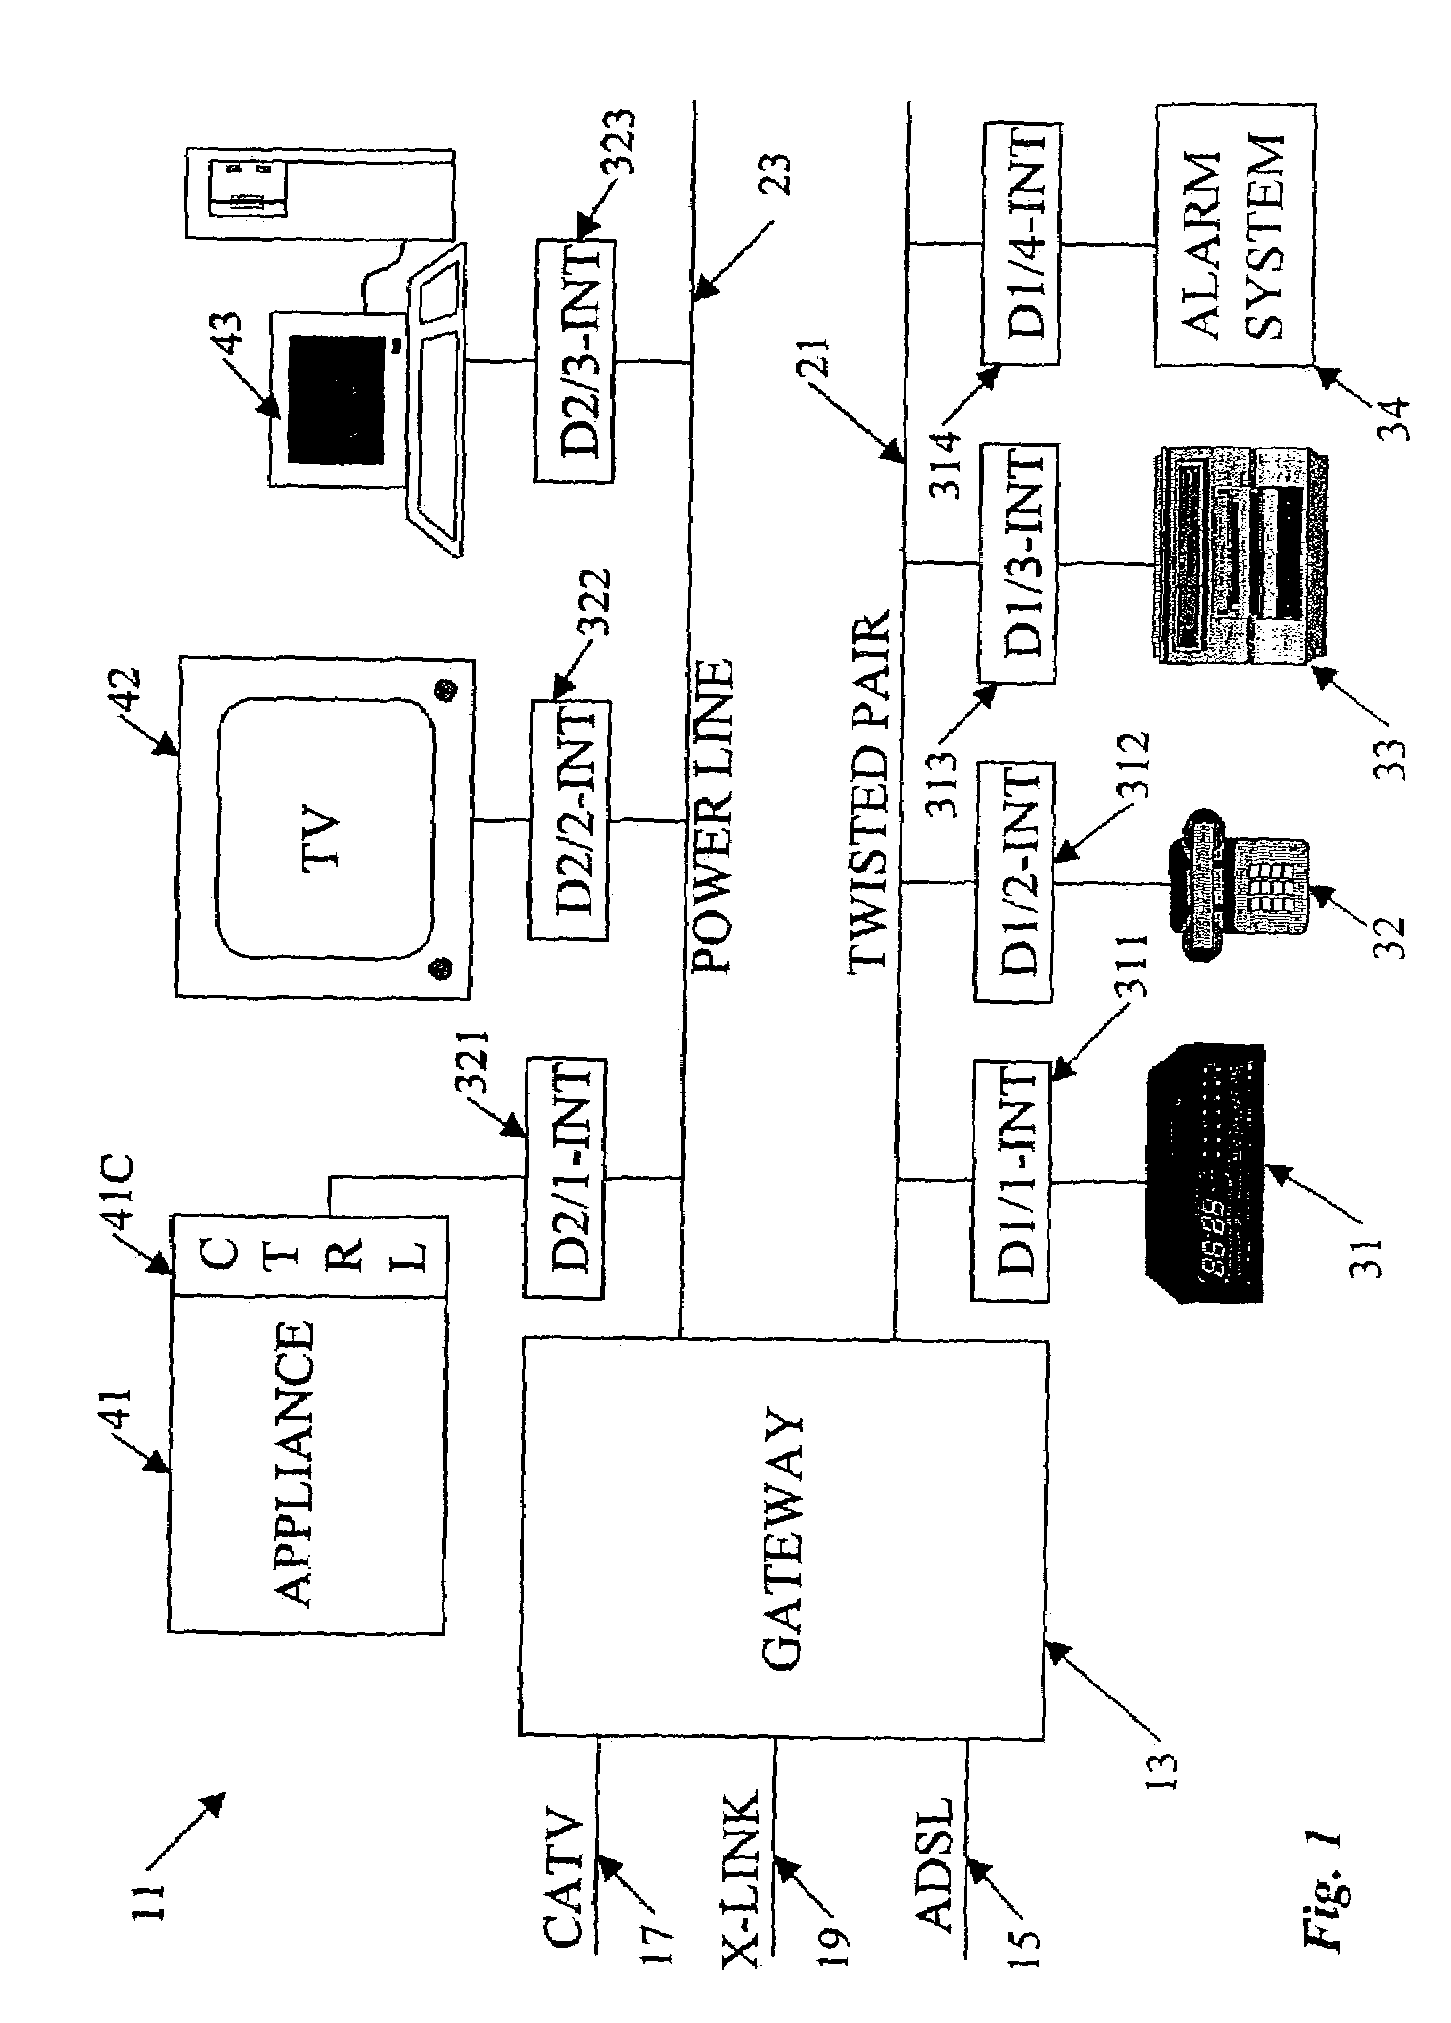 Multi-service in-home network with an open interface